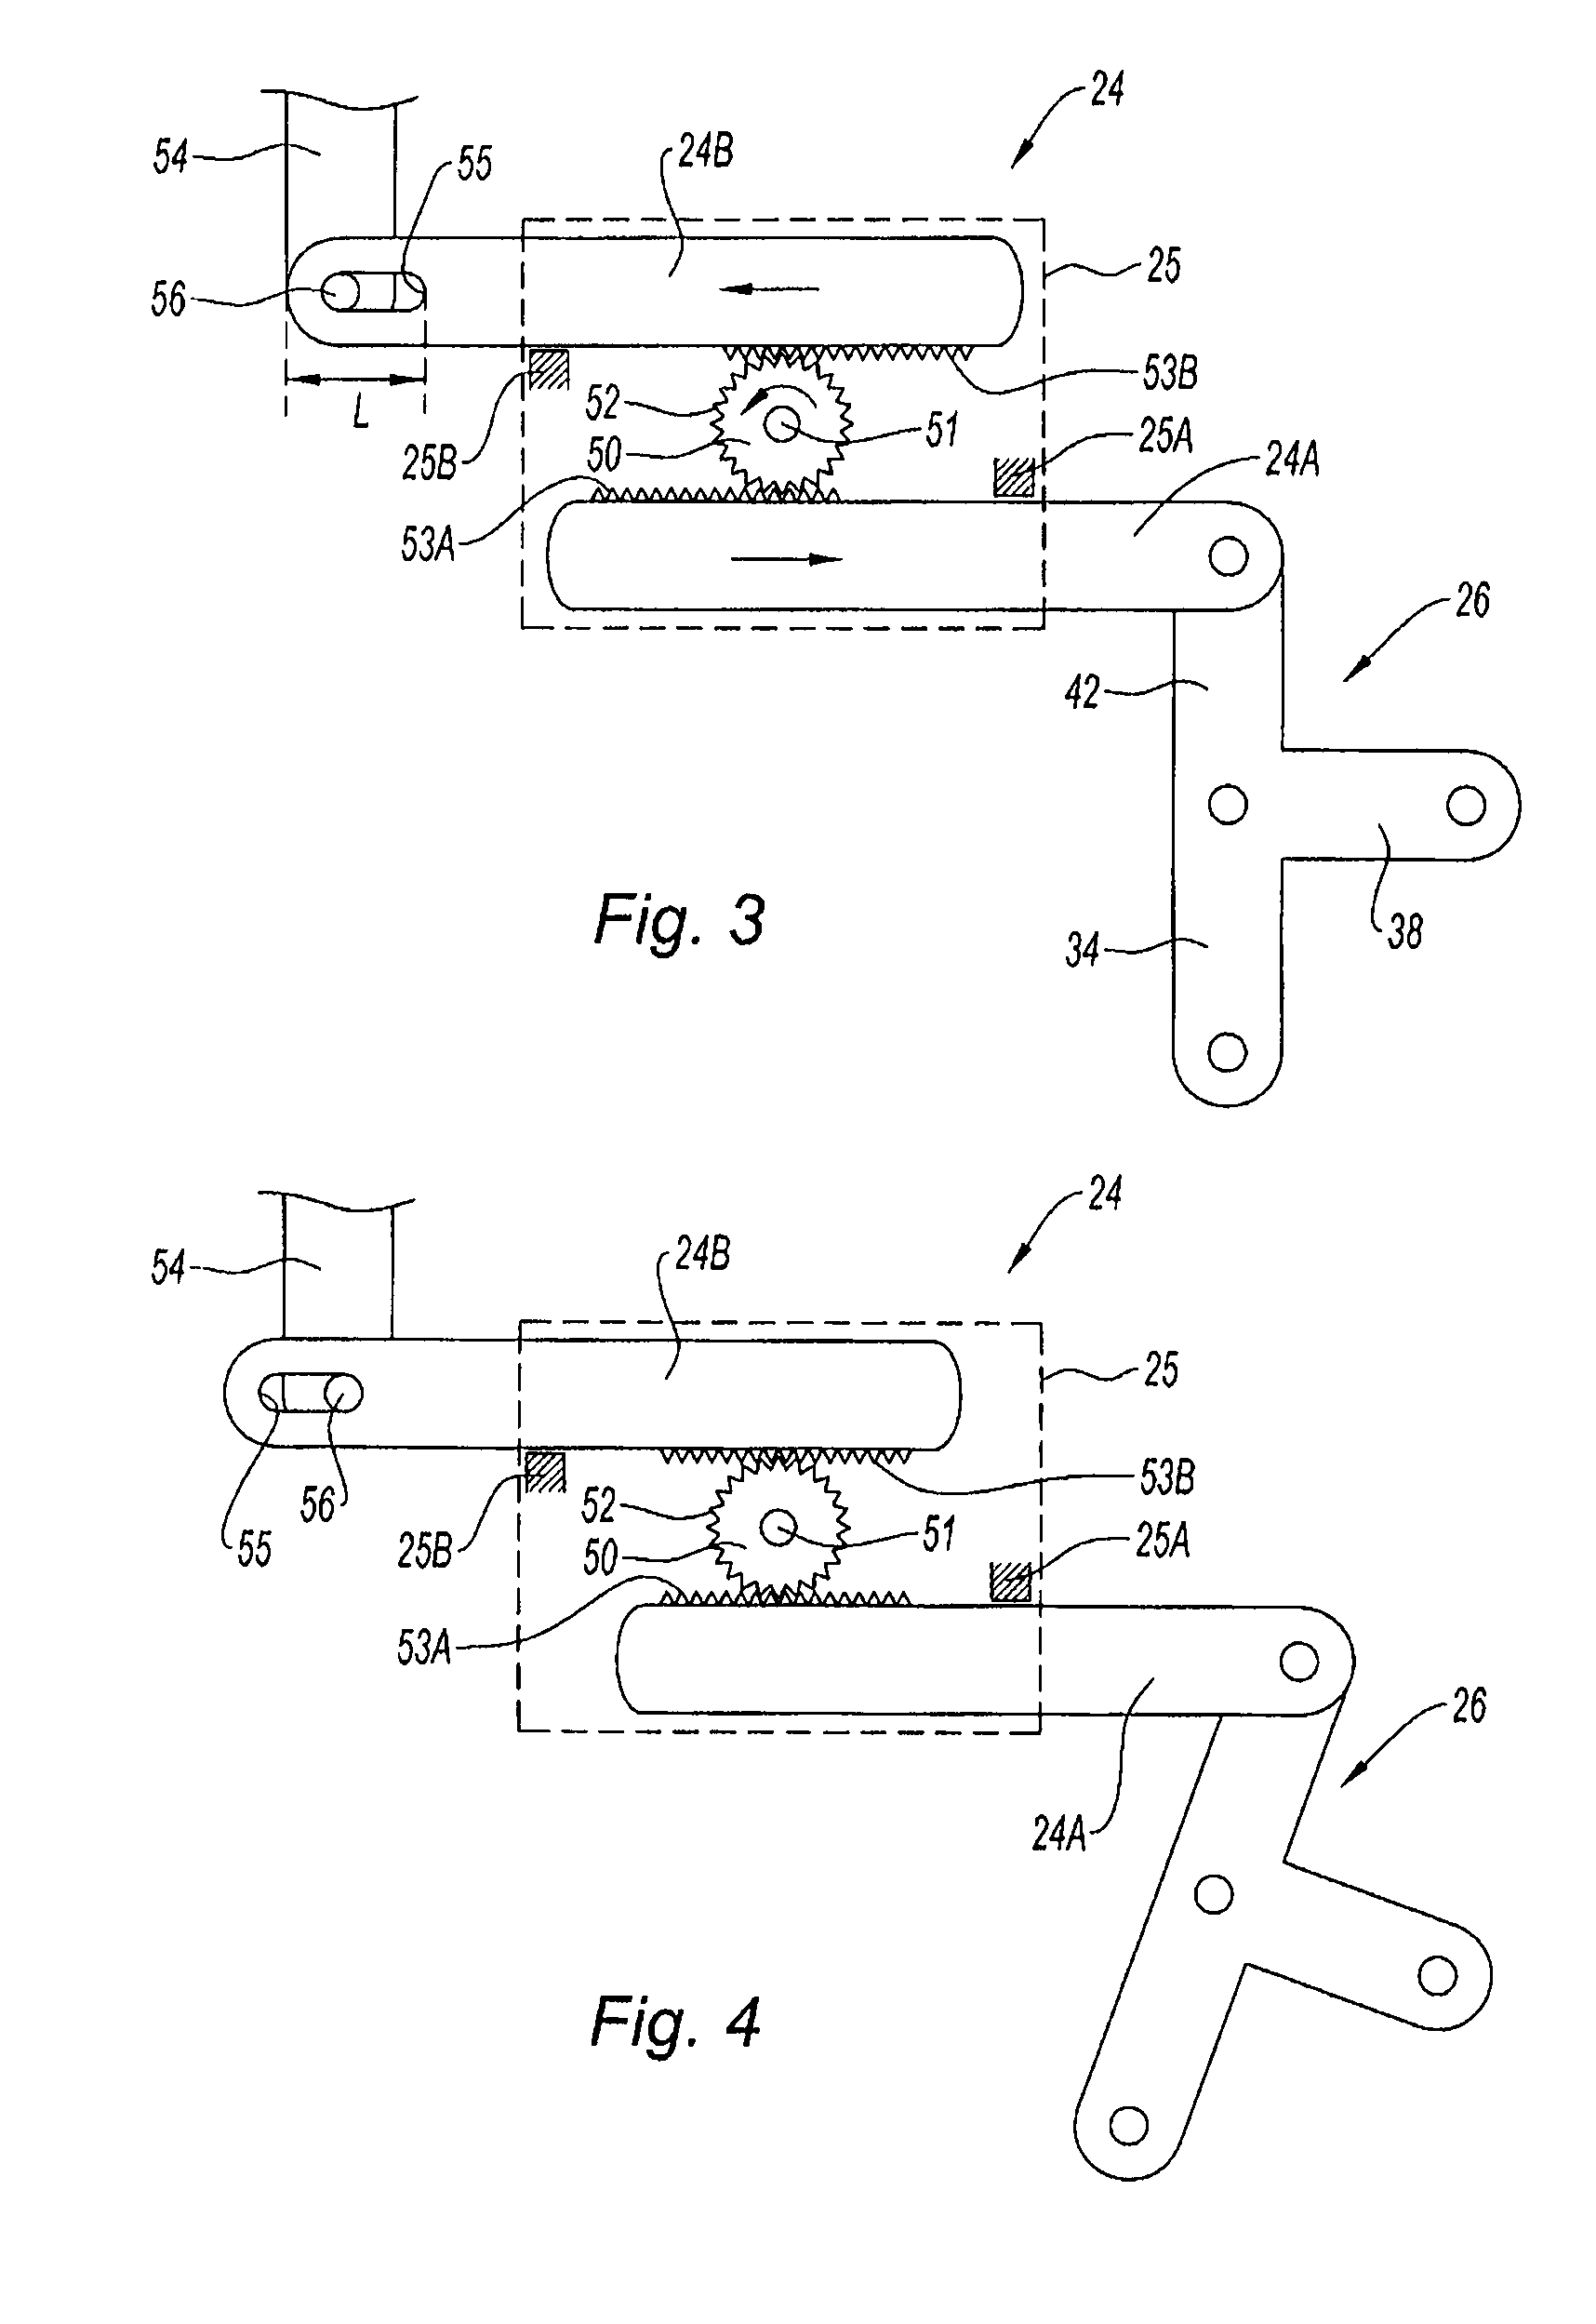 System for controlling at least two variable-geometry equipments of a gas turbine engine, particularly by rack